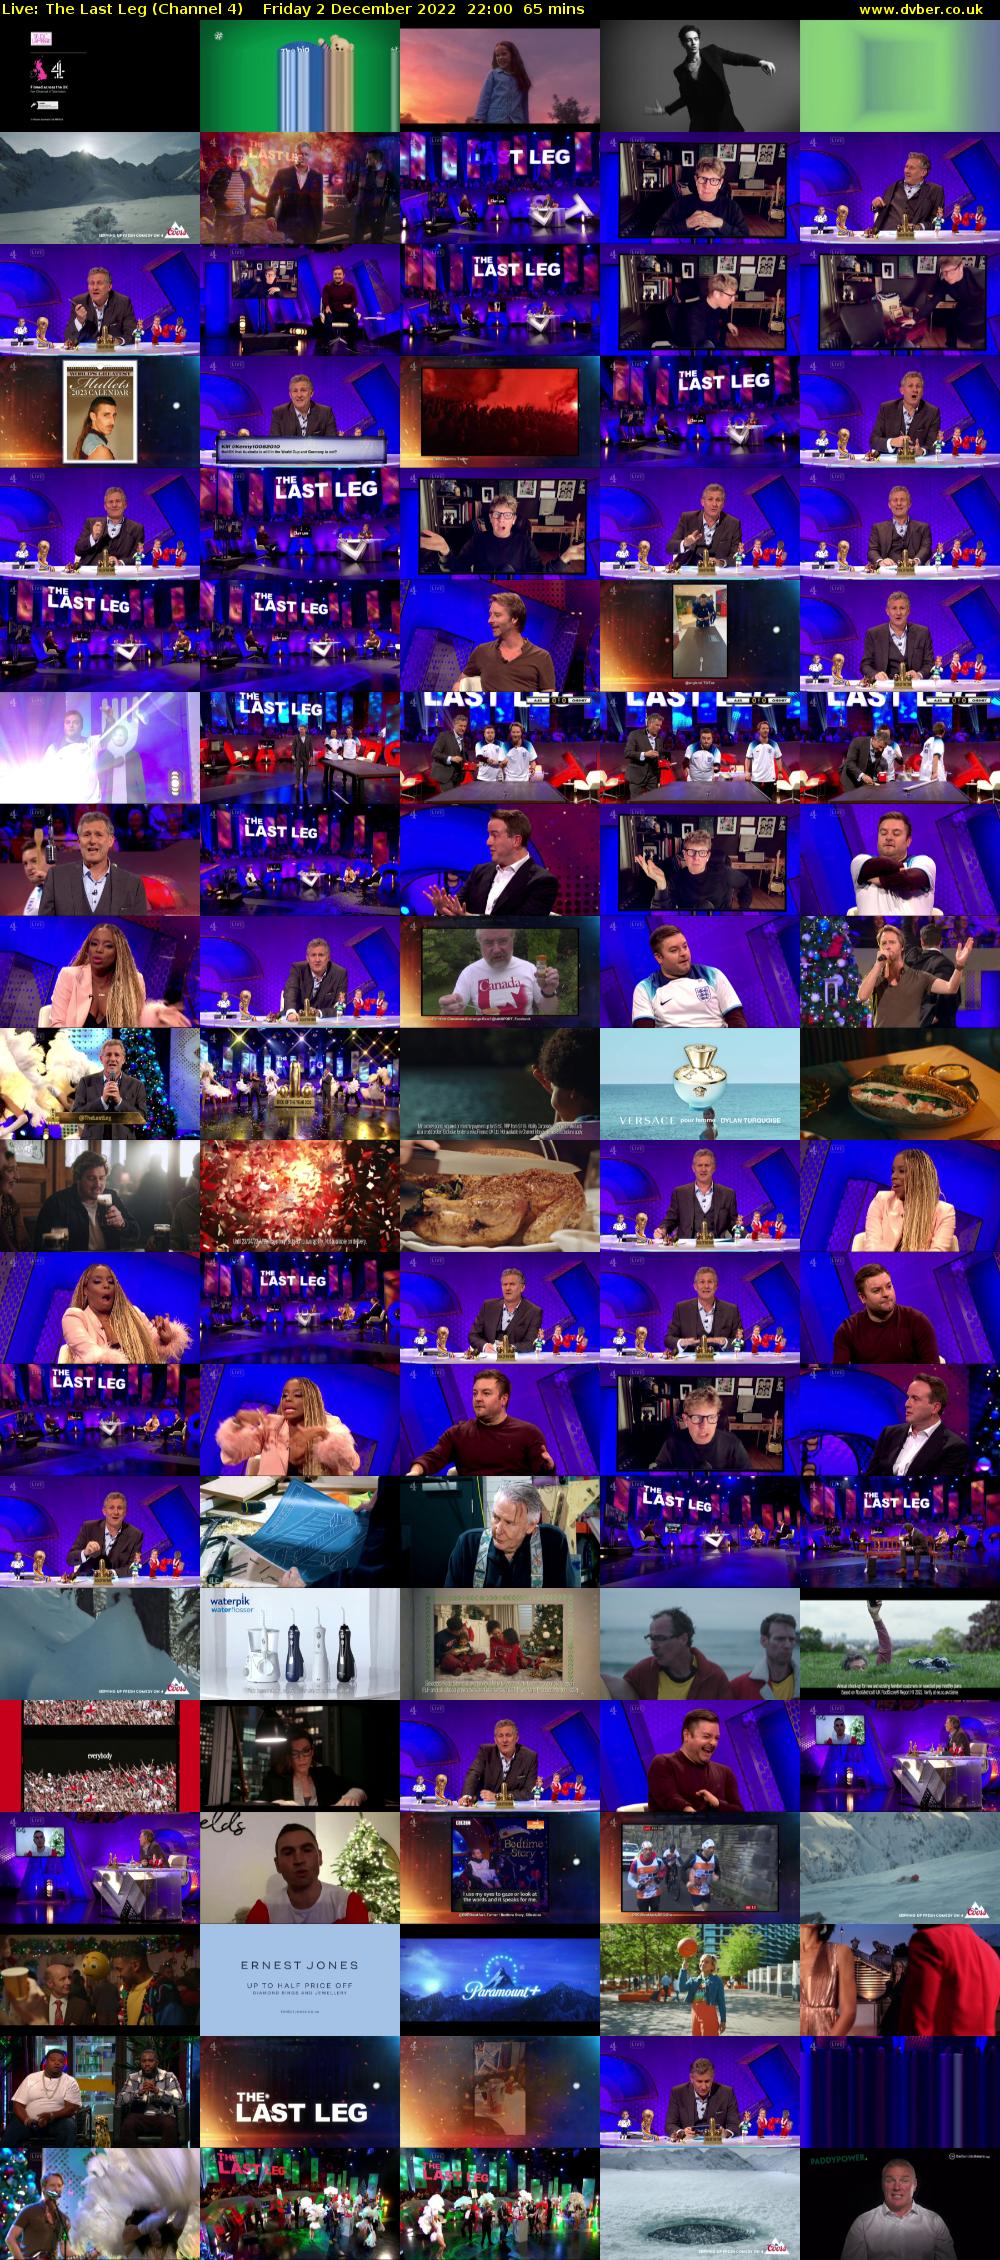 Live: The Last Leg (Channel 4) Friday 2 December 2022 22:00 - 23:05